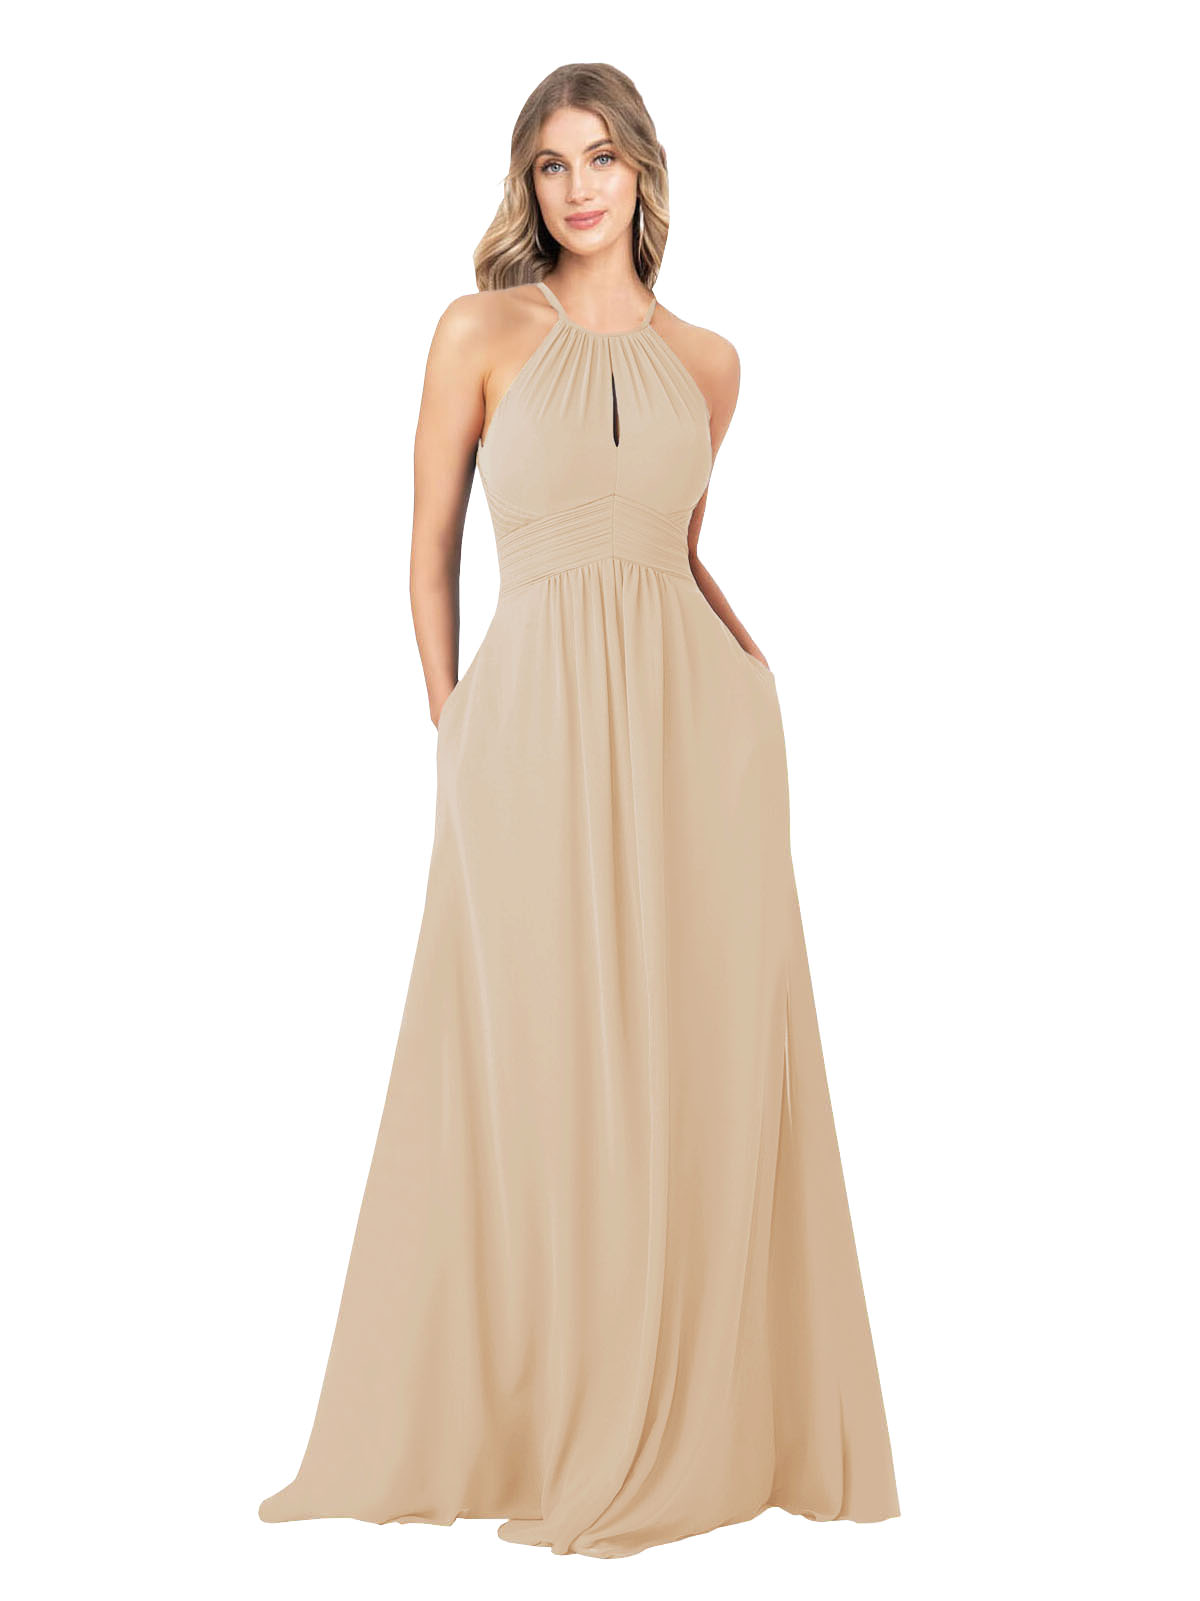 Champagne A-Line High Neck Sleeveless Long Bridesmaid Dress Cassiopeia